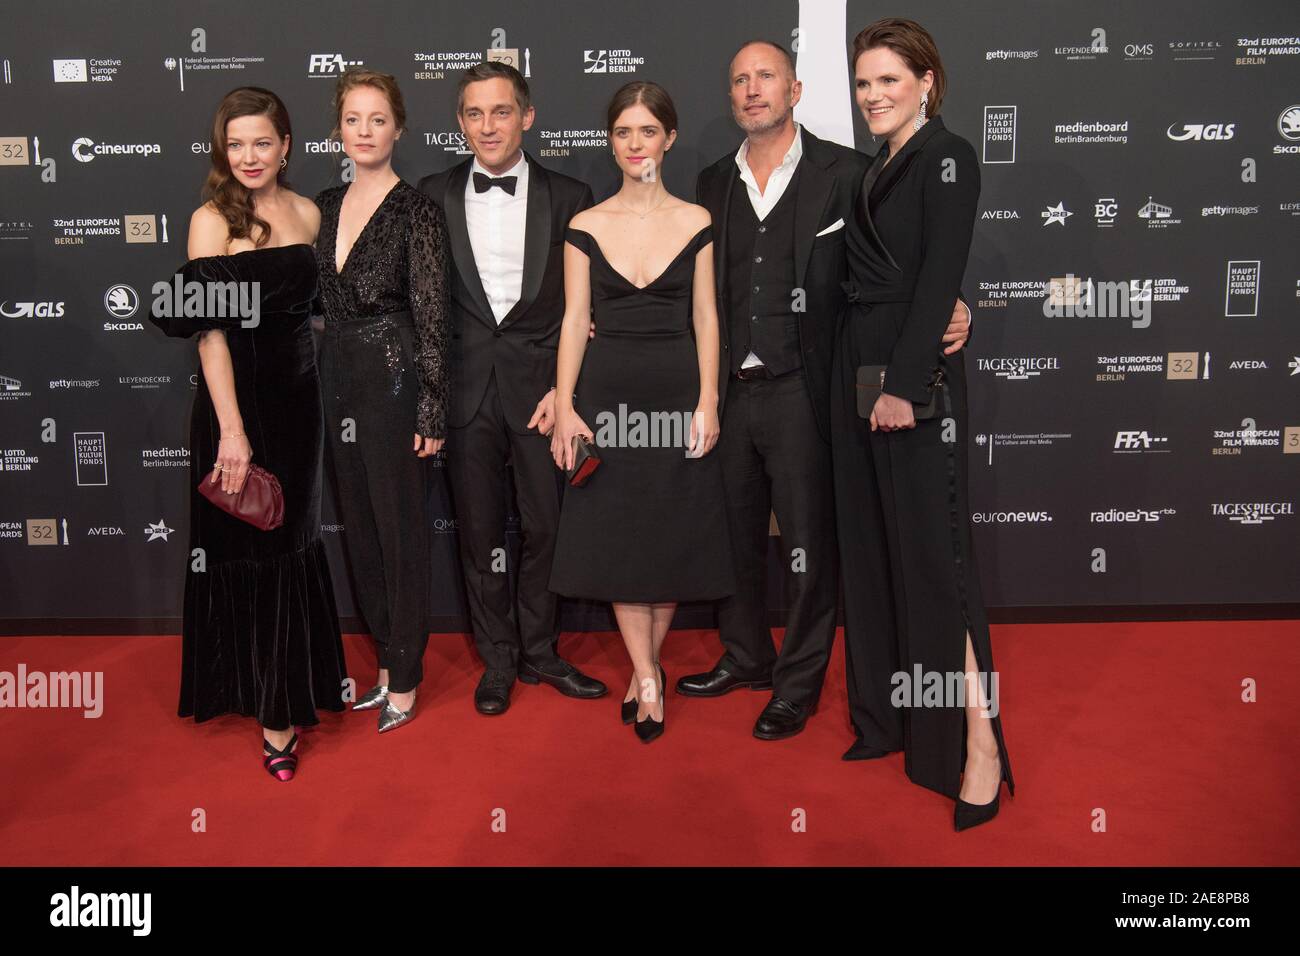 Berlin, Germany.     07th Dec, 2019. The actress Hannah Herzsprung (l-r), Leonie Benesch, Volker Bruch, Liv Lisa Fries, Benno Führmann and Fritzi Haberlandt come to the European Film Awards ceremony. Credit: Jörg Carstensen/dpa/Alamy Live News Credit: dpa picture alliance/Alamy Live News Stock Photo